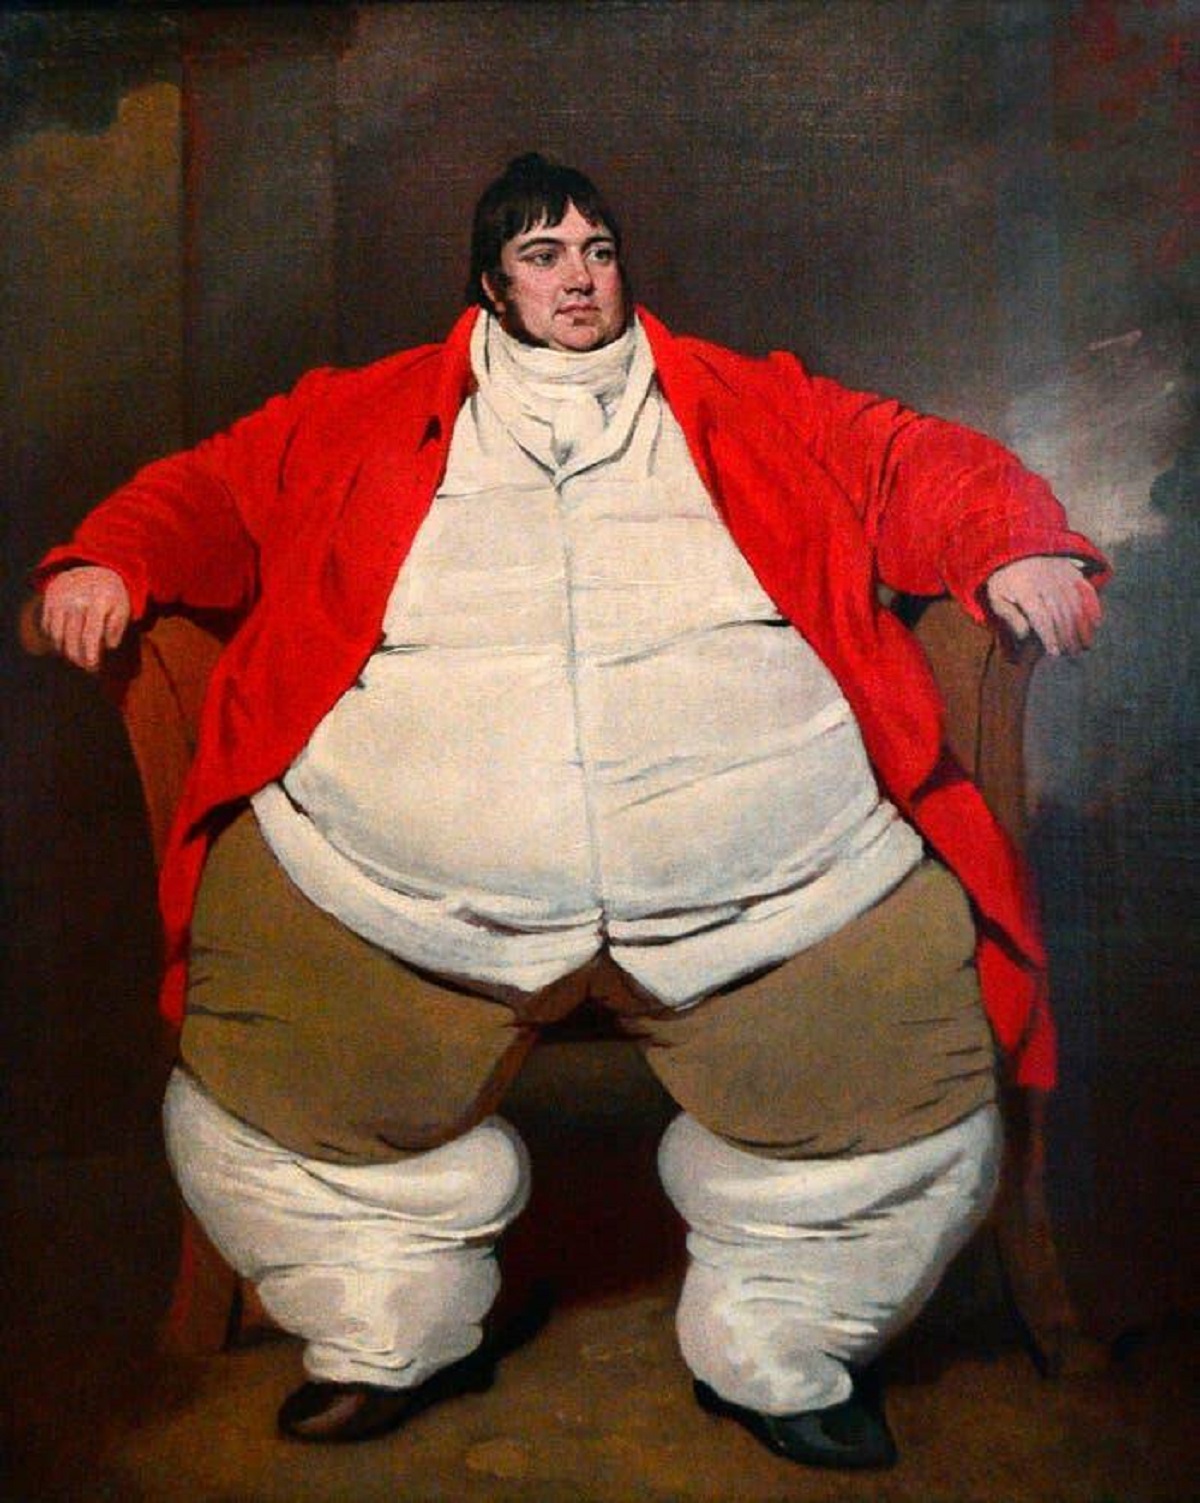 This is Daniel Lambert, a British man who was known as the world's heaviest person in the 18th century. He weighed over 700 pounds. Legend has it he once fought off a bear single-handedly.